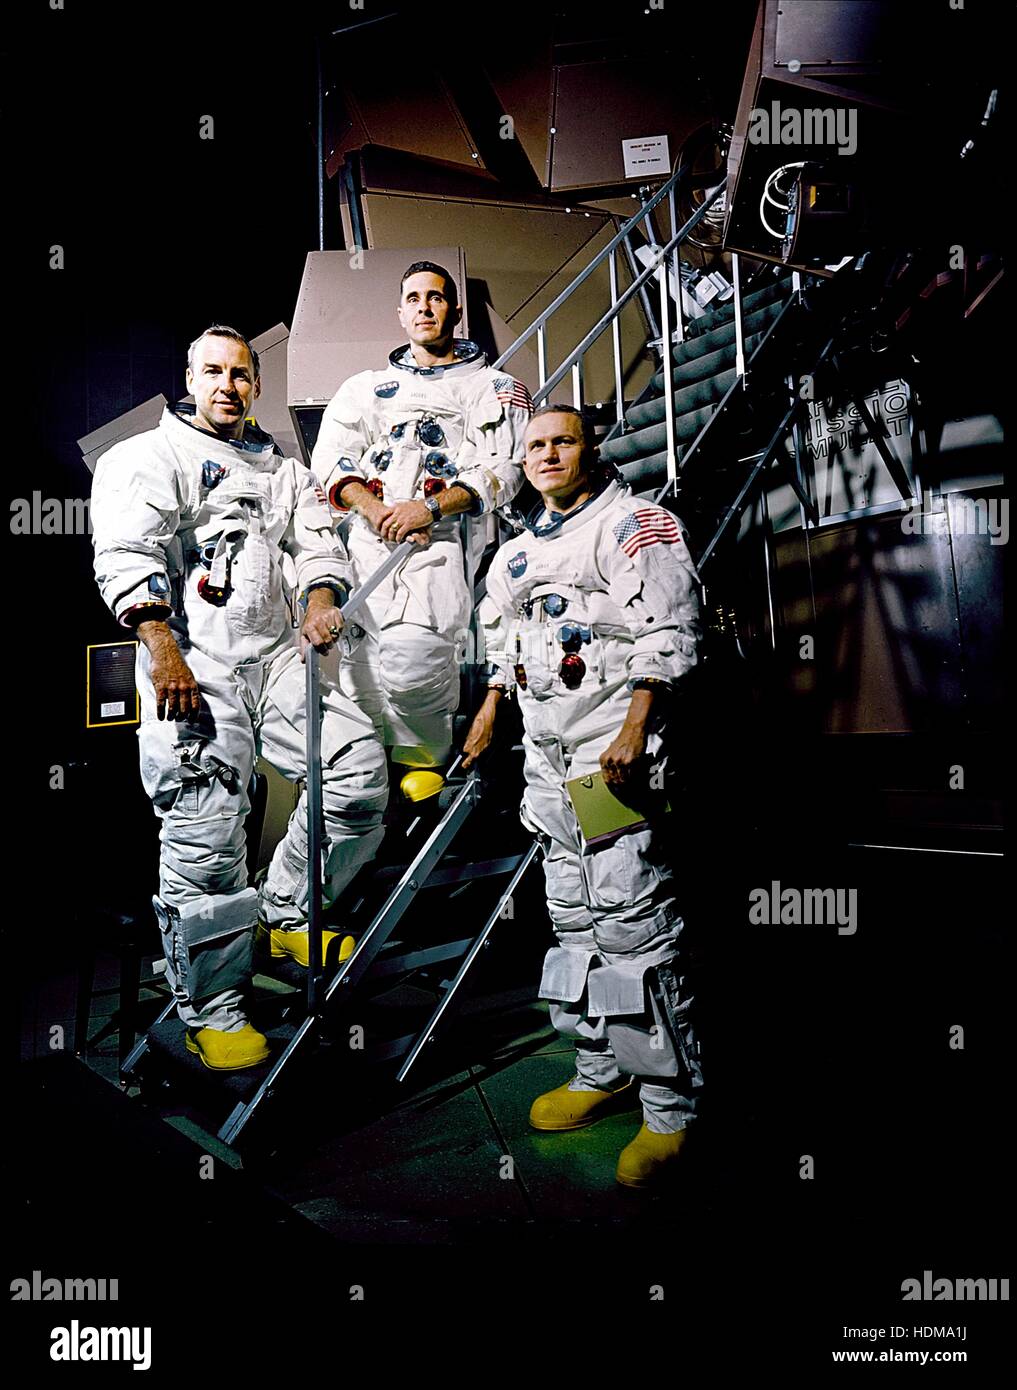 NASA Apollo 8 prime crew astronauts (L-R) Jim Lovell, Bill Anders, and Frank Borman pose in their spacesuits in front of the Kennedy Space Center simulator November 22, 1968 in Merritt Island, Florida. Stock Photo